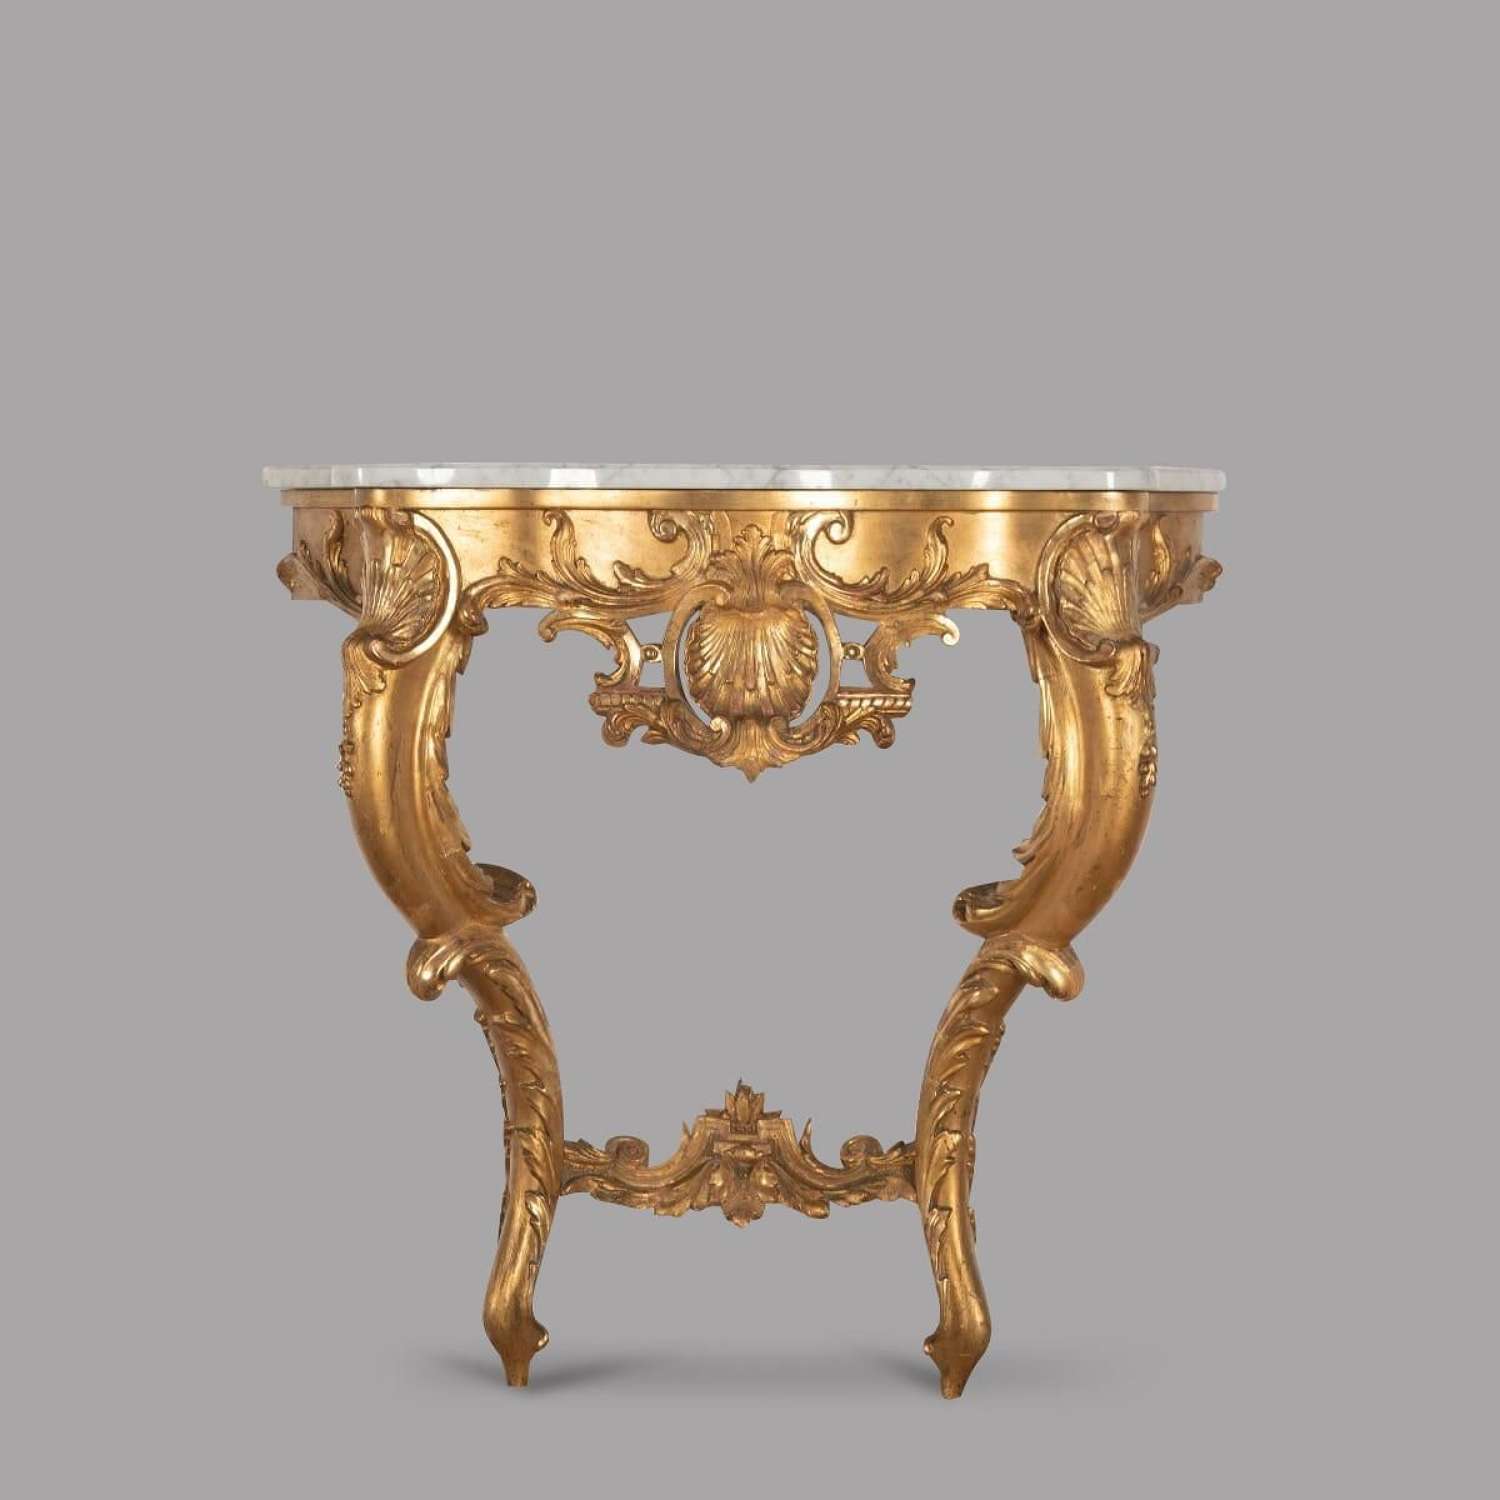 19th Century French Giltwood %26 Ormolu Console Table